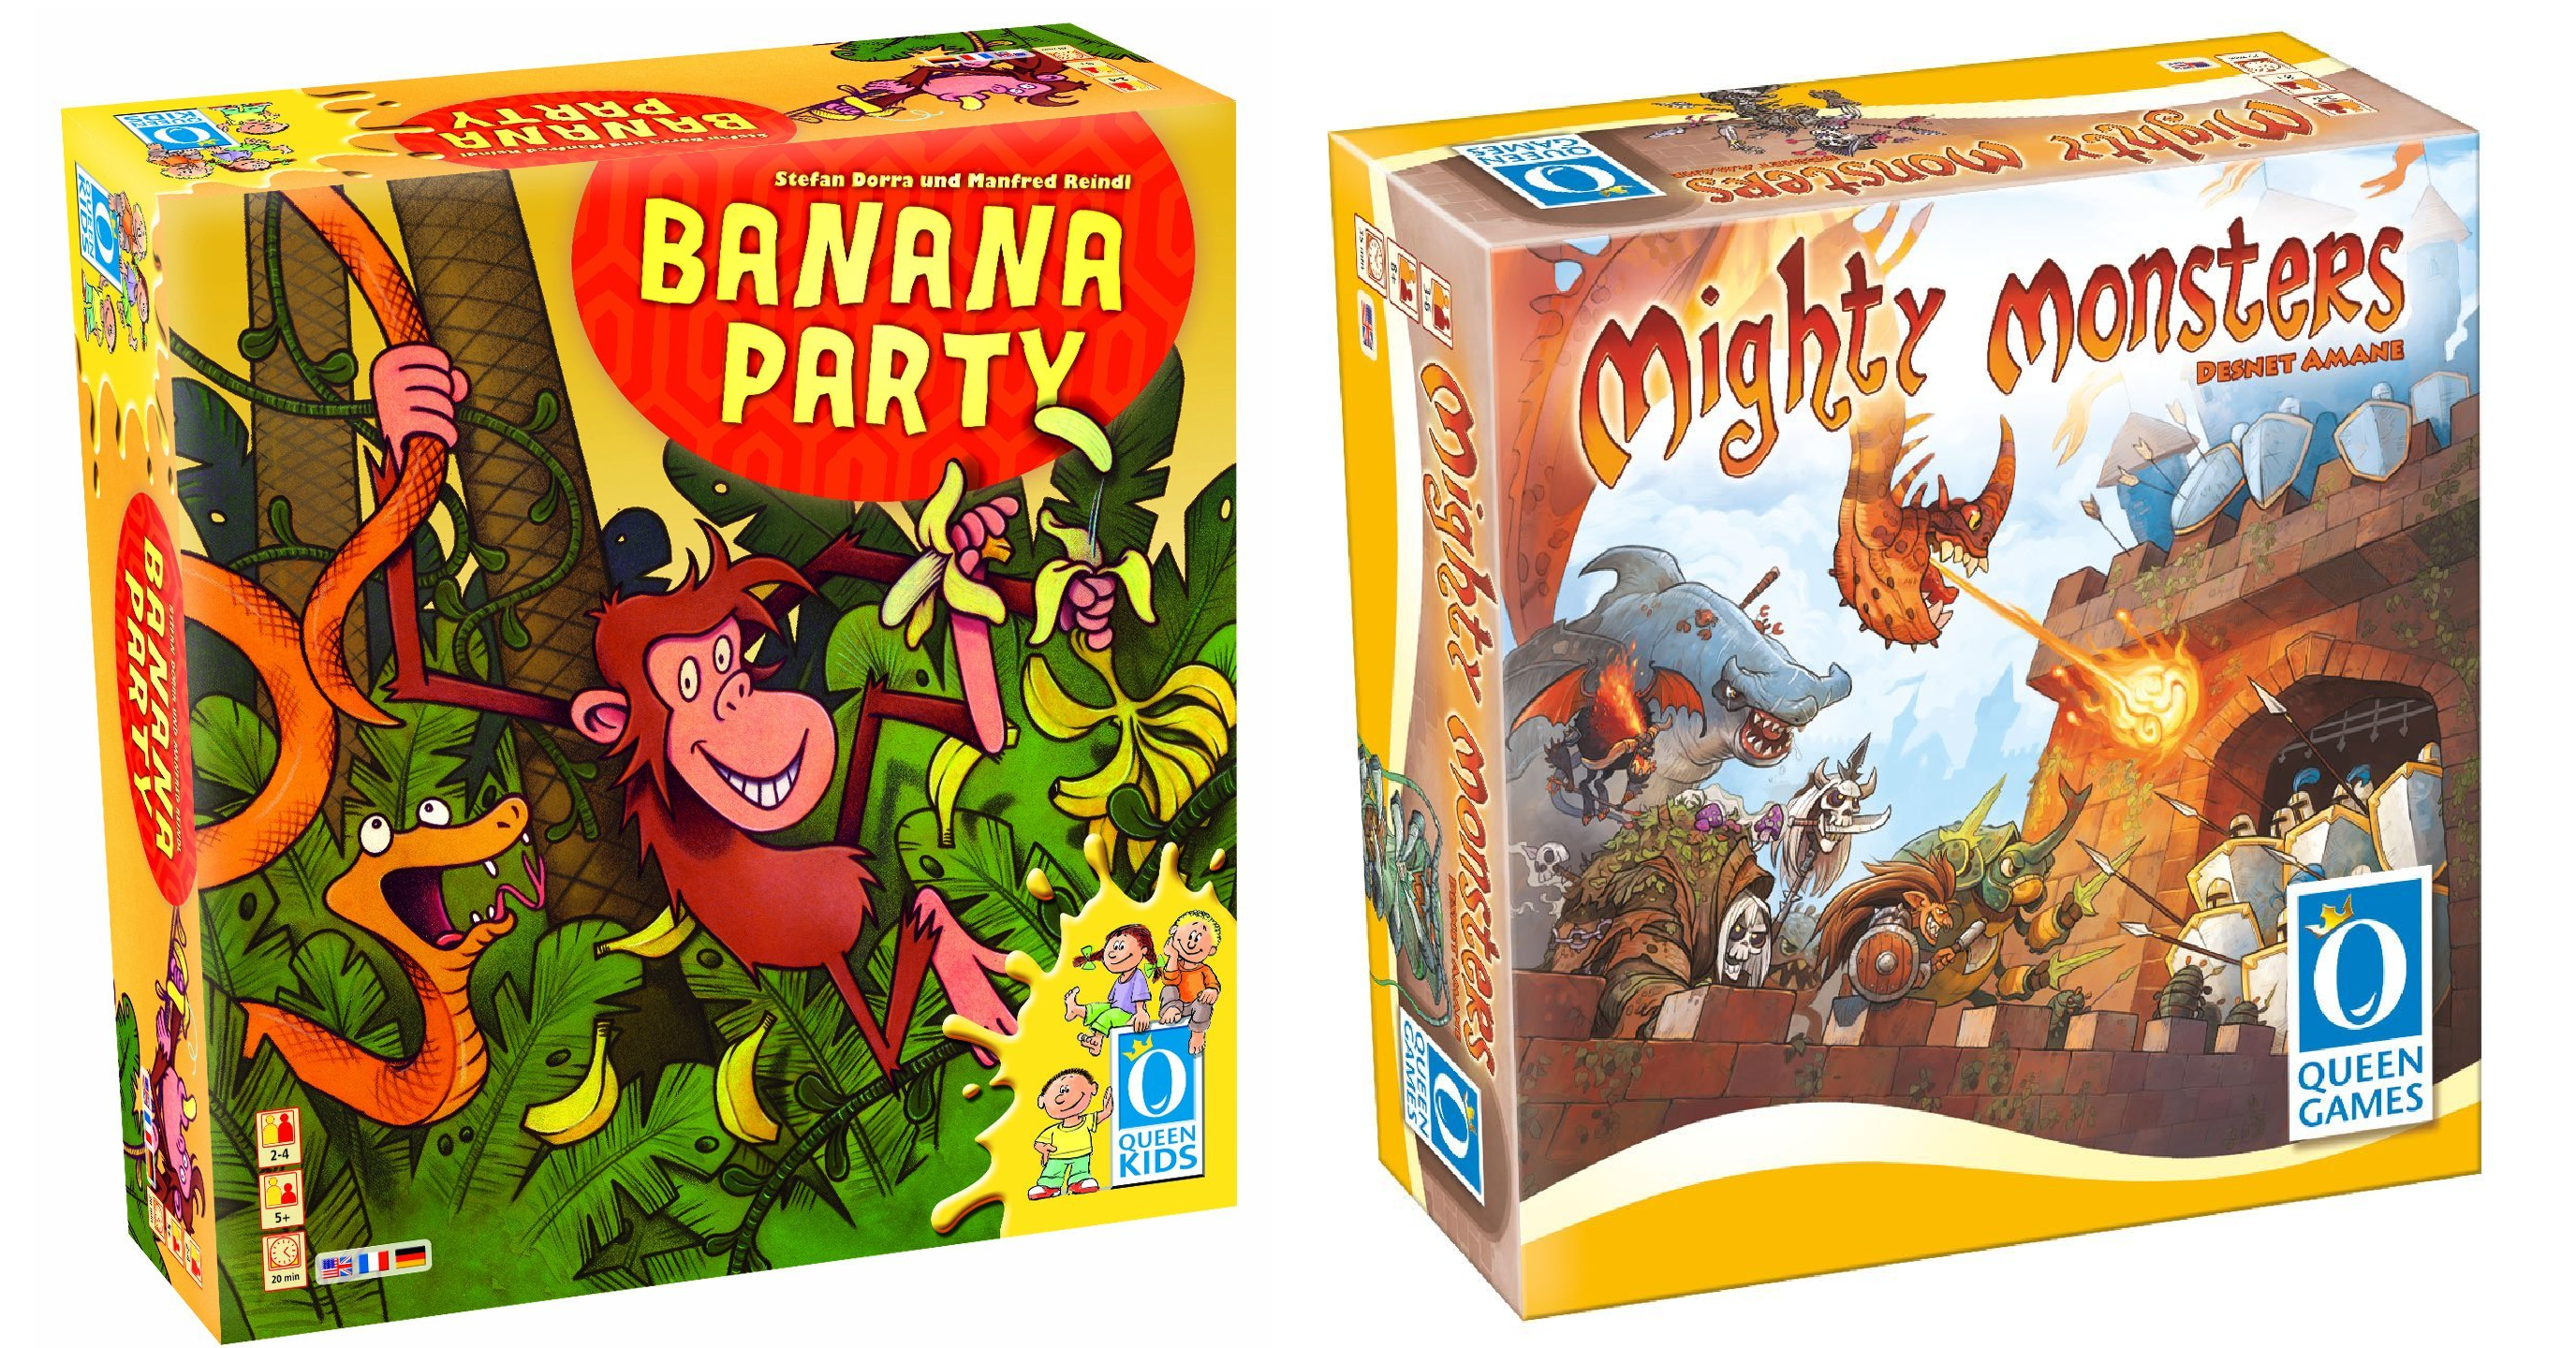 Amazon: Banana Party Board Game Just $6.29 -AND- Mighty Monsters Family Board Game Only $7.63!